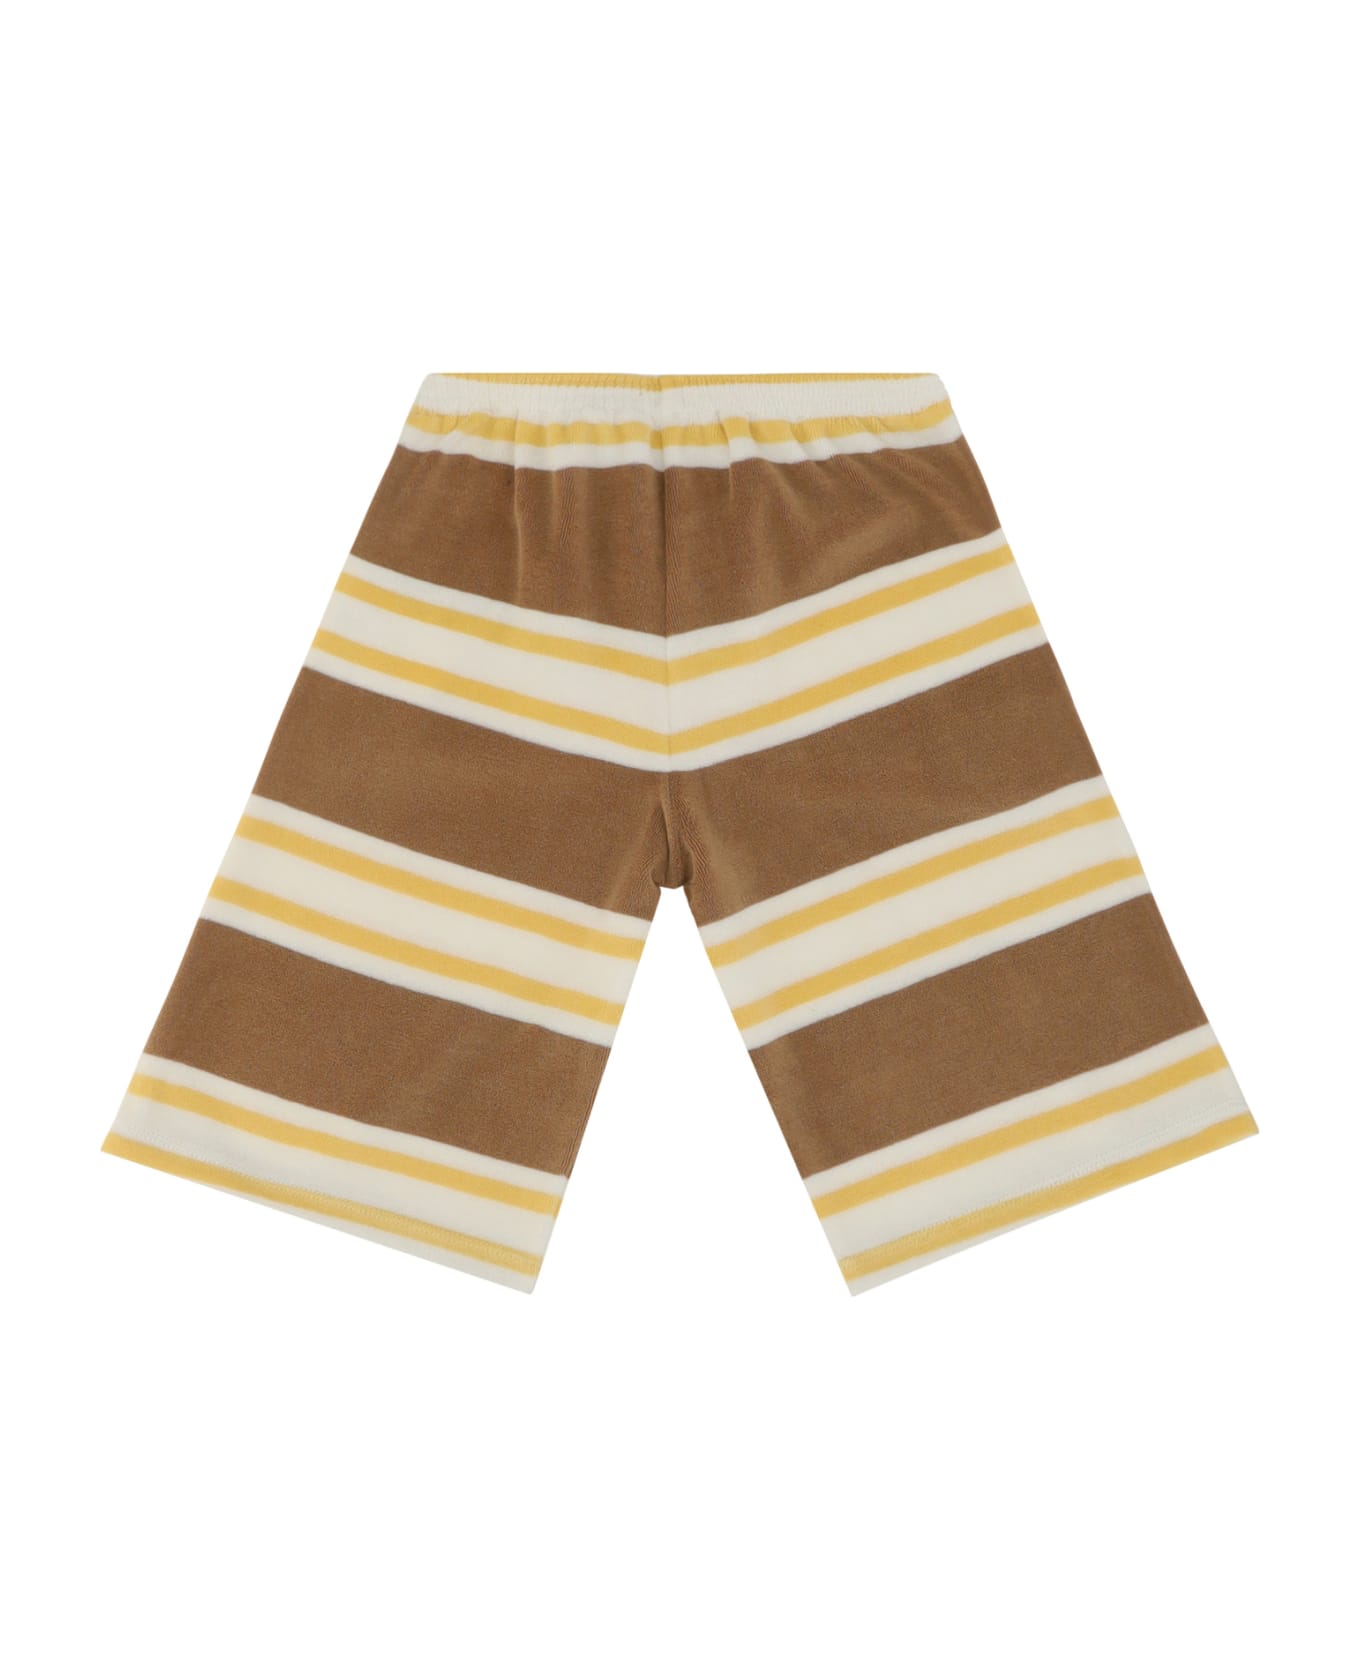 Gucci Shorts For Boy - Yellow/brown